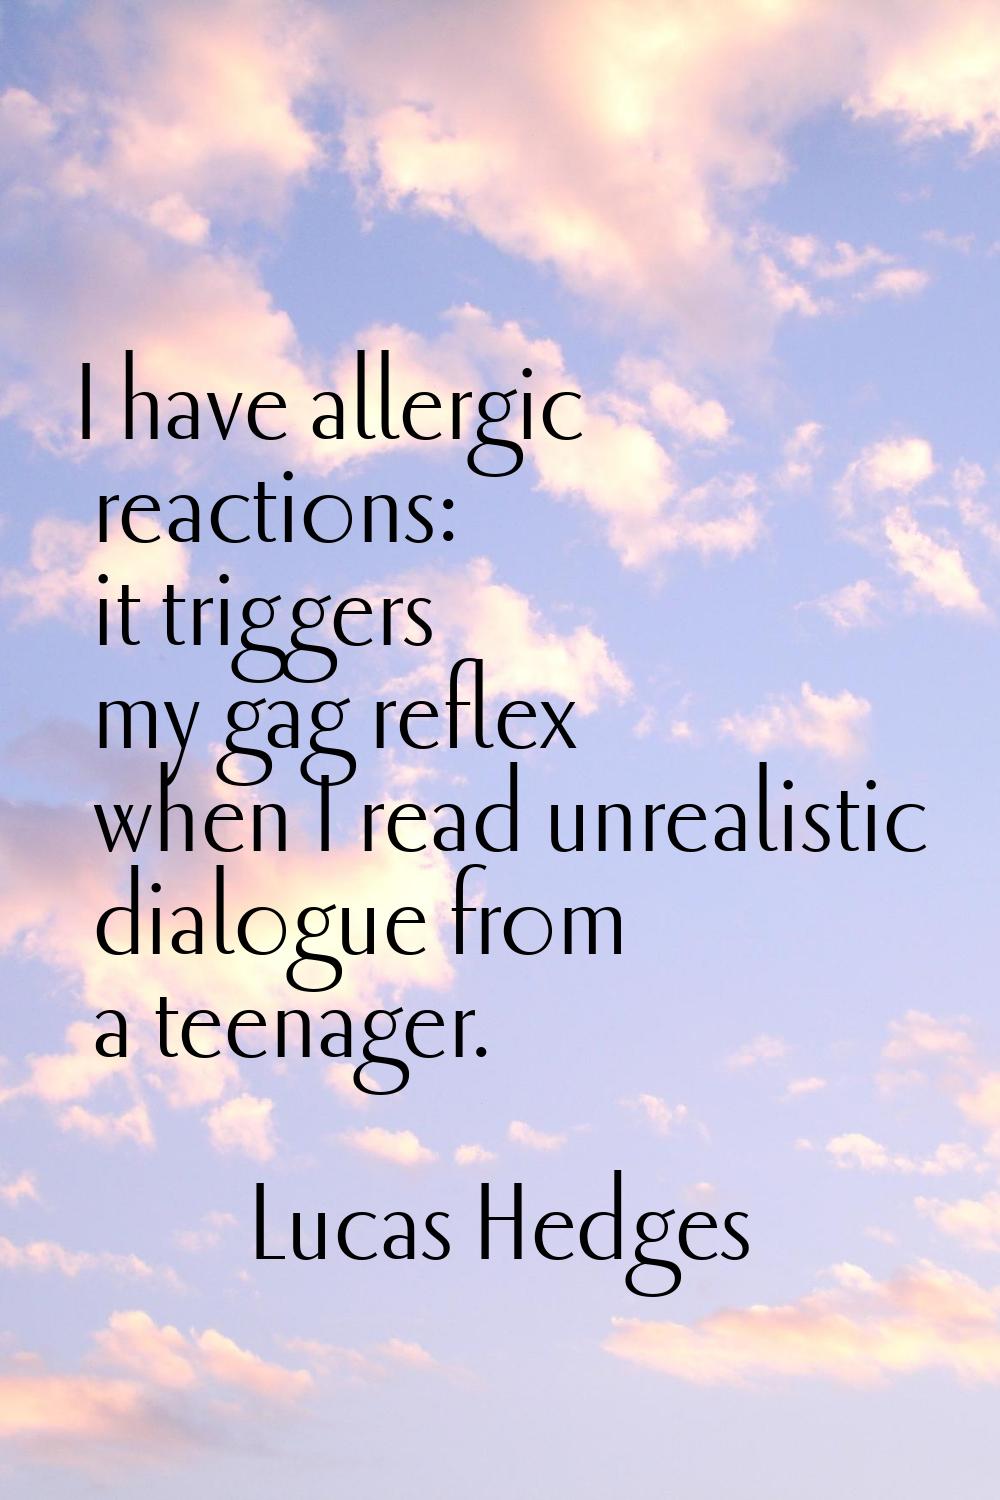 I have allergic reactions: it triggers my gag reflex when I read unrealistic dialogue from a teenag